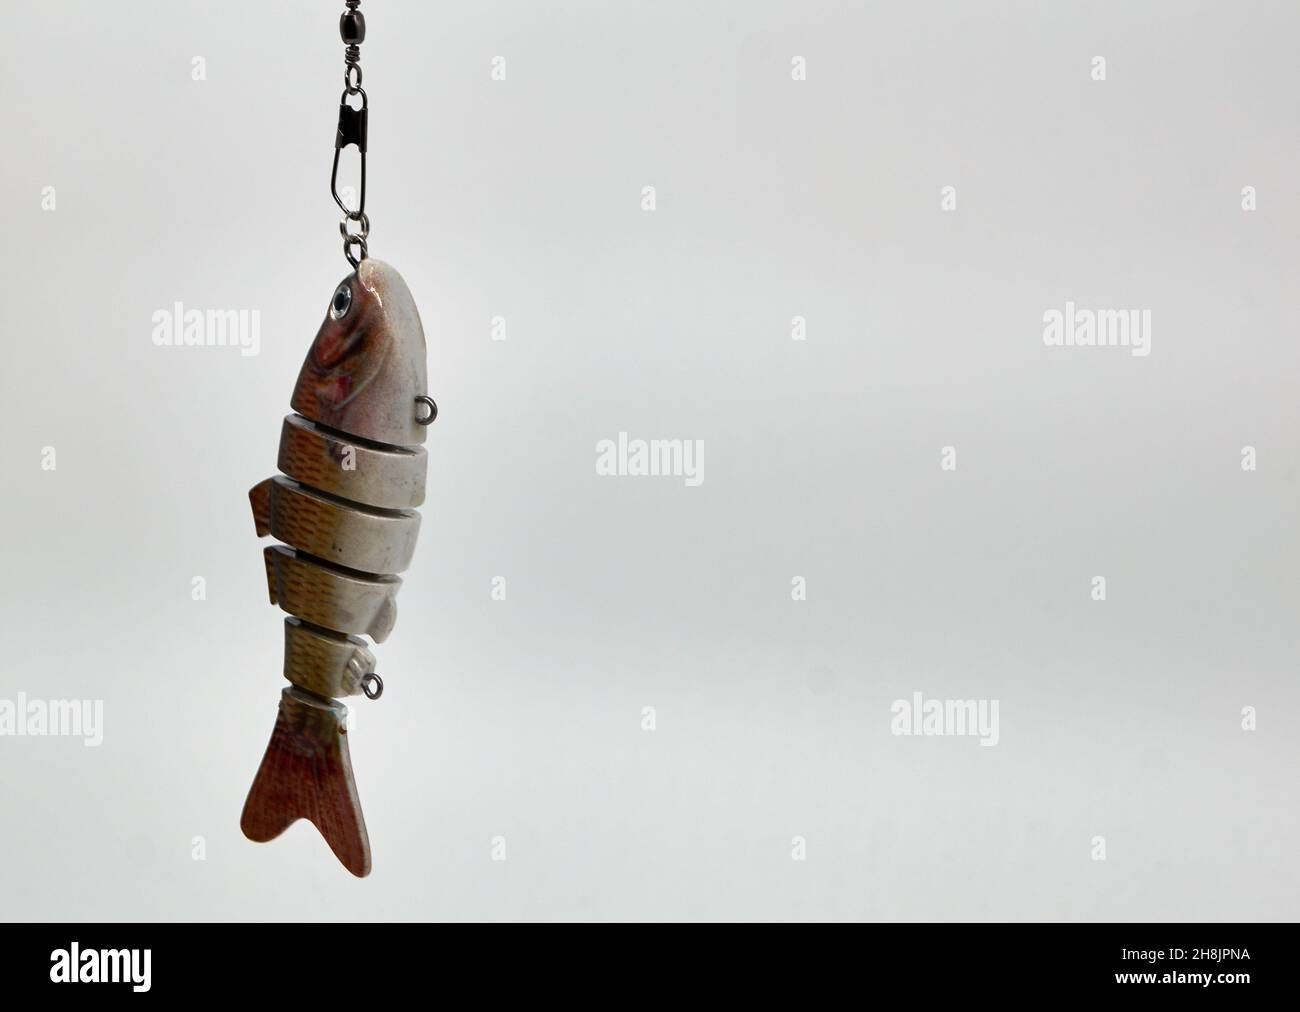 An artificial fish, used as bait by anglers on a white background. With space for text. Stock Photo